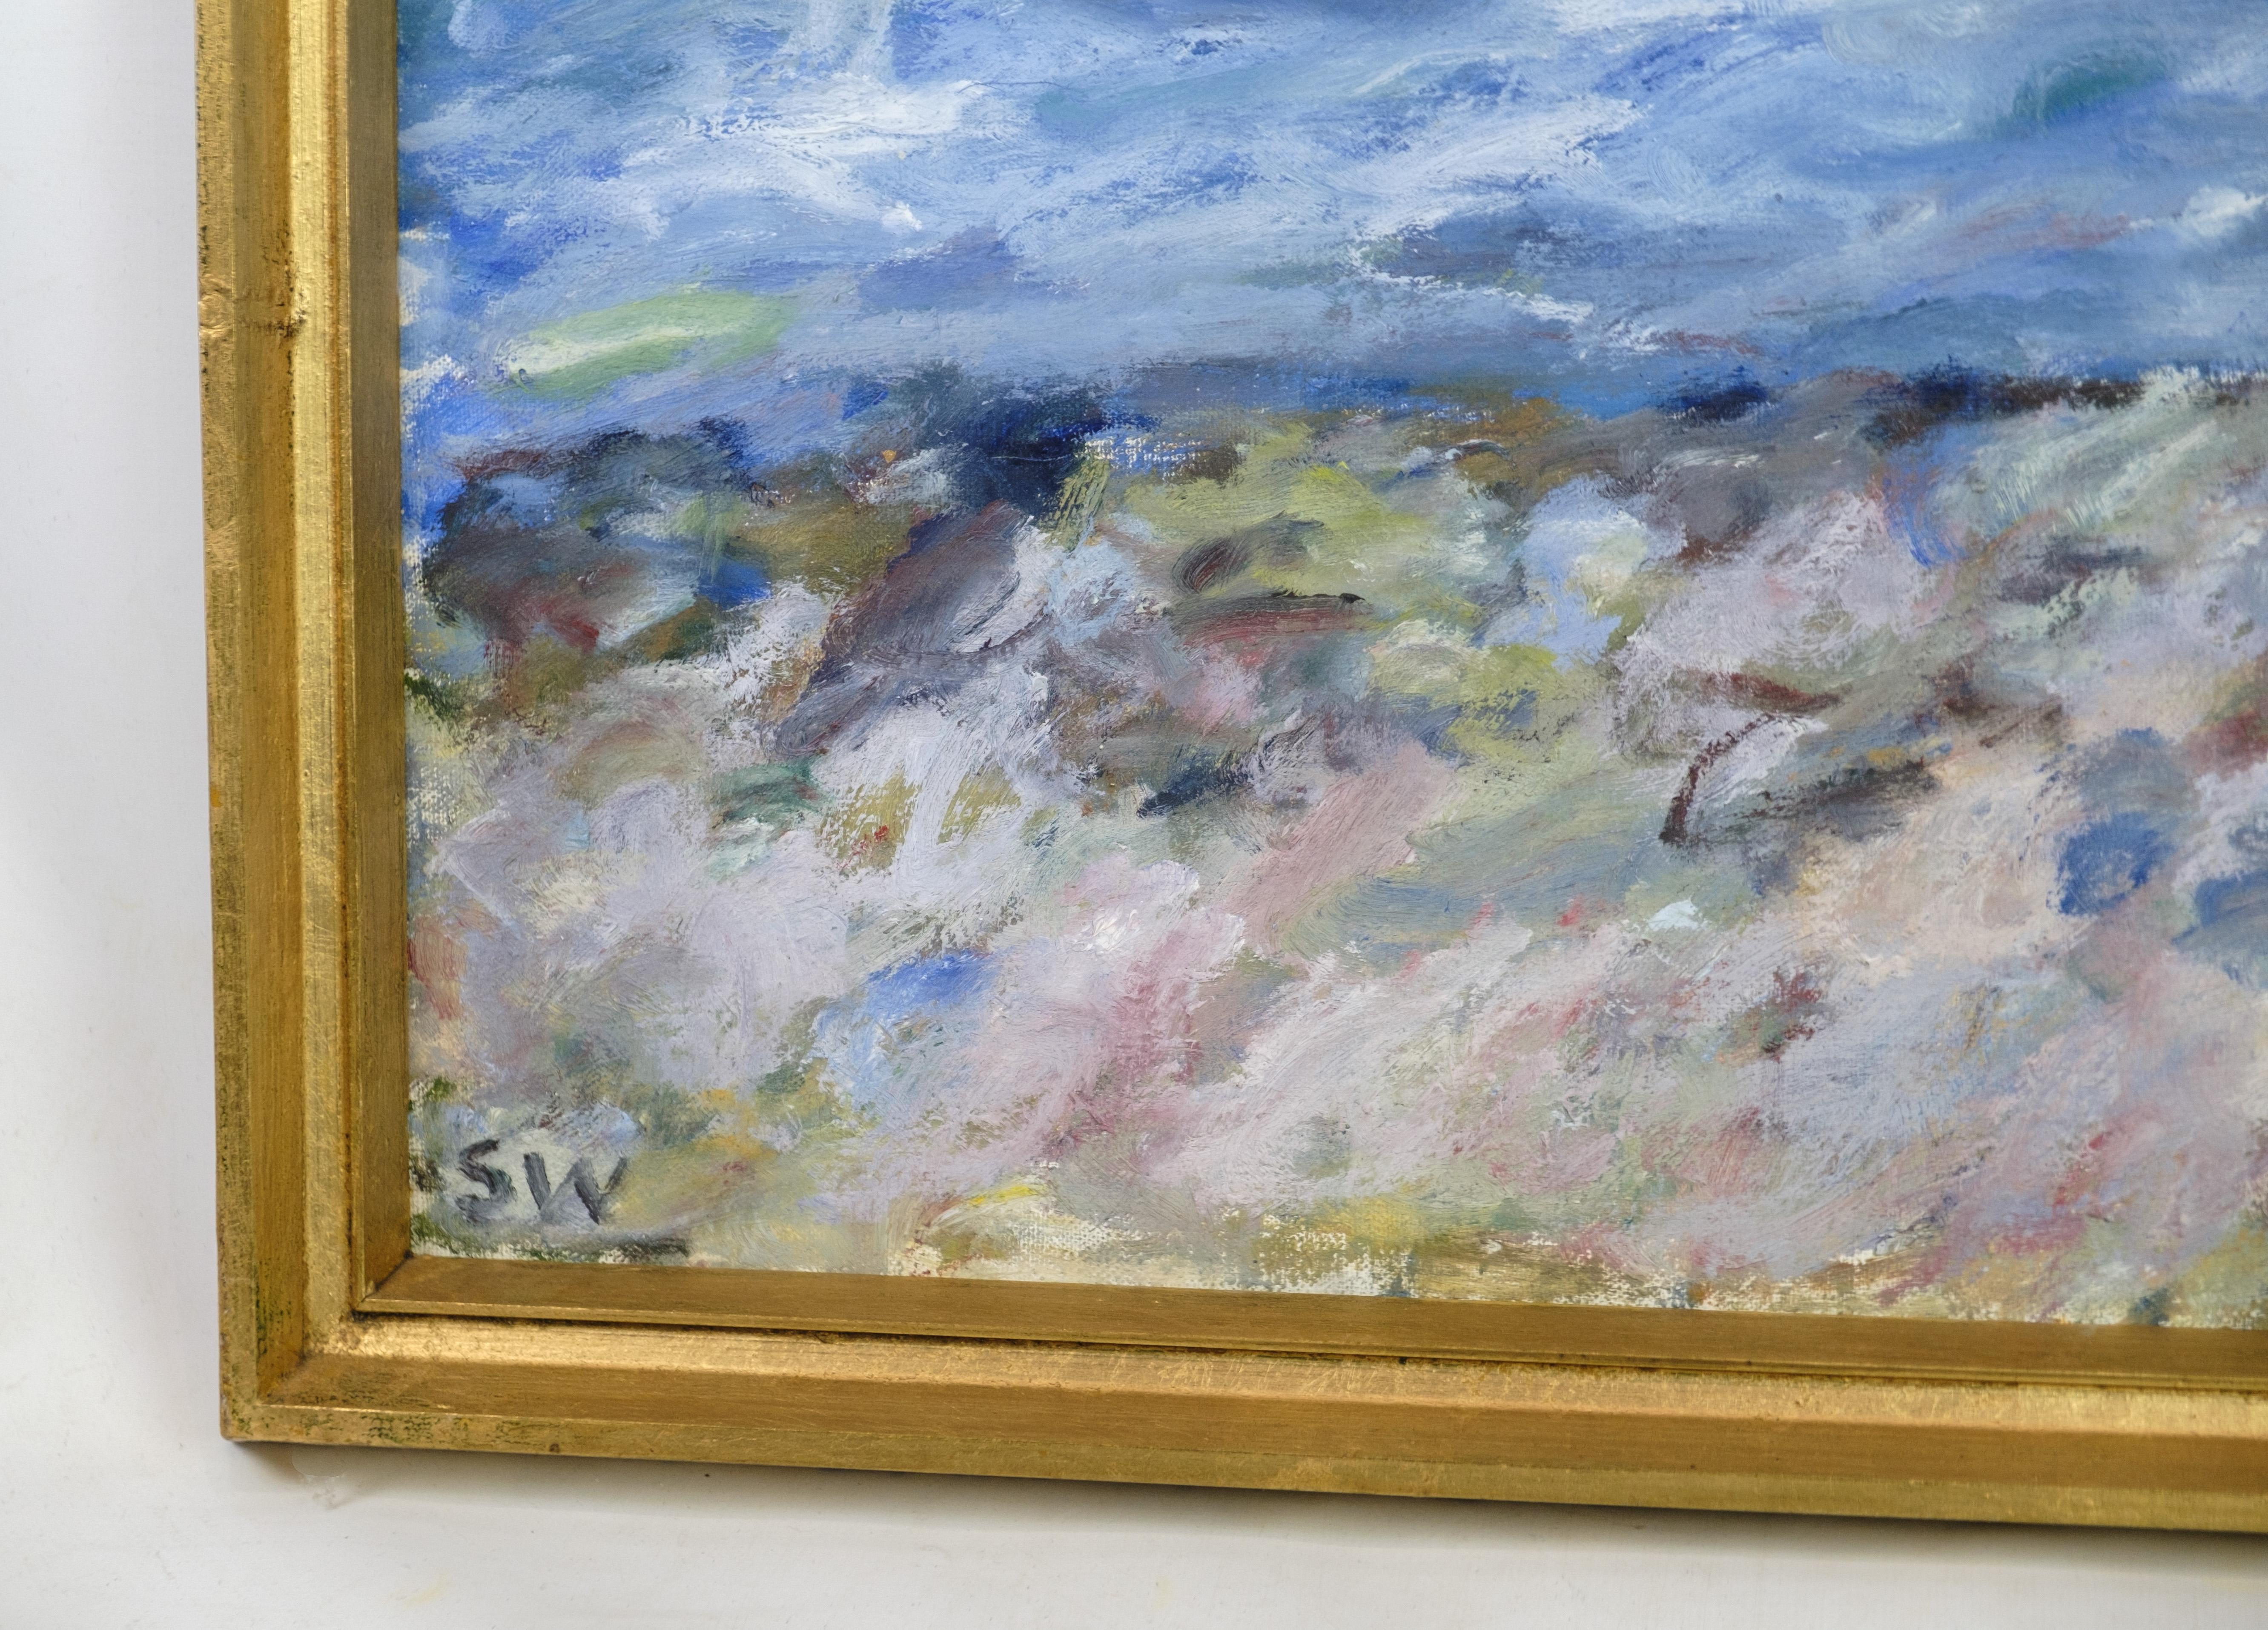 The oil painting on canvas, depicting a tranquil beach and sea scene, was masterfully crafted by Sixten Wiklund (1907-1986) around the 1950s.

Capturing the serene beauty of the coastline, Wiklund's brushstrokes skillfully evoke the soothing rhythm